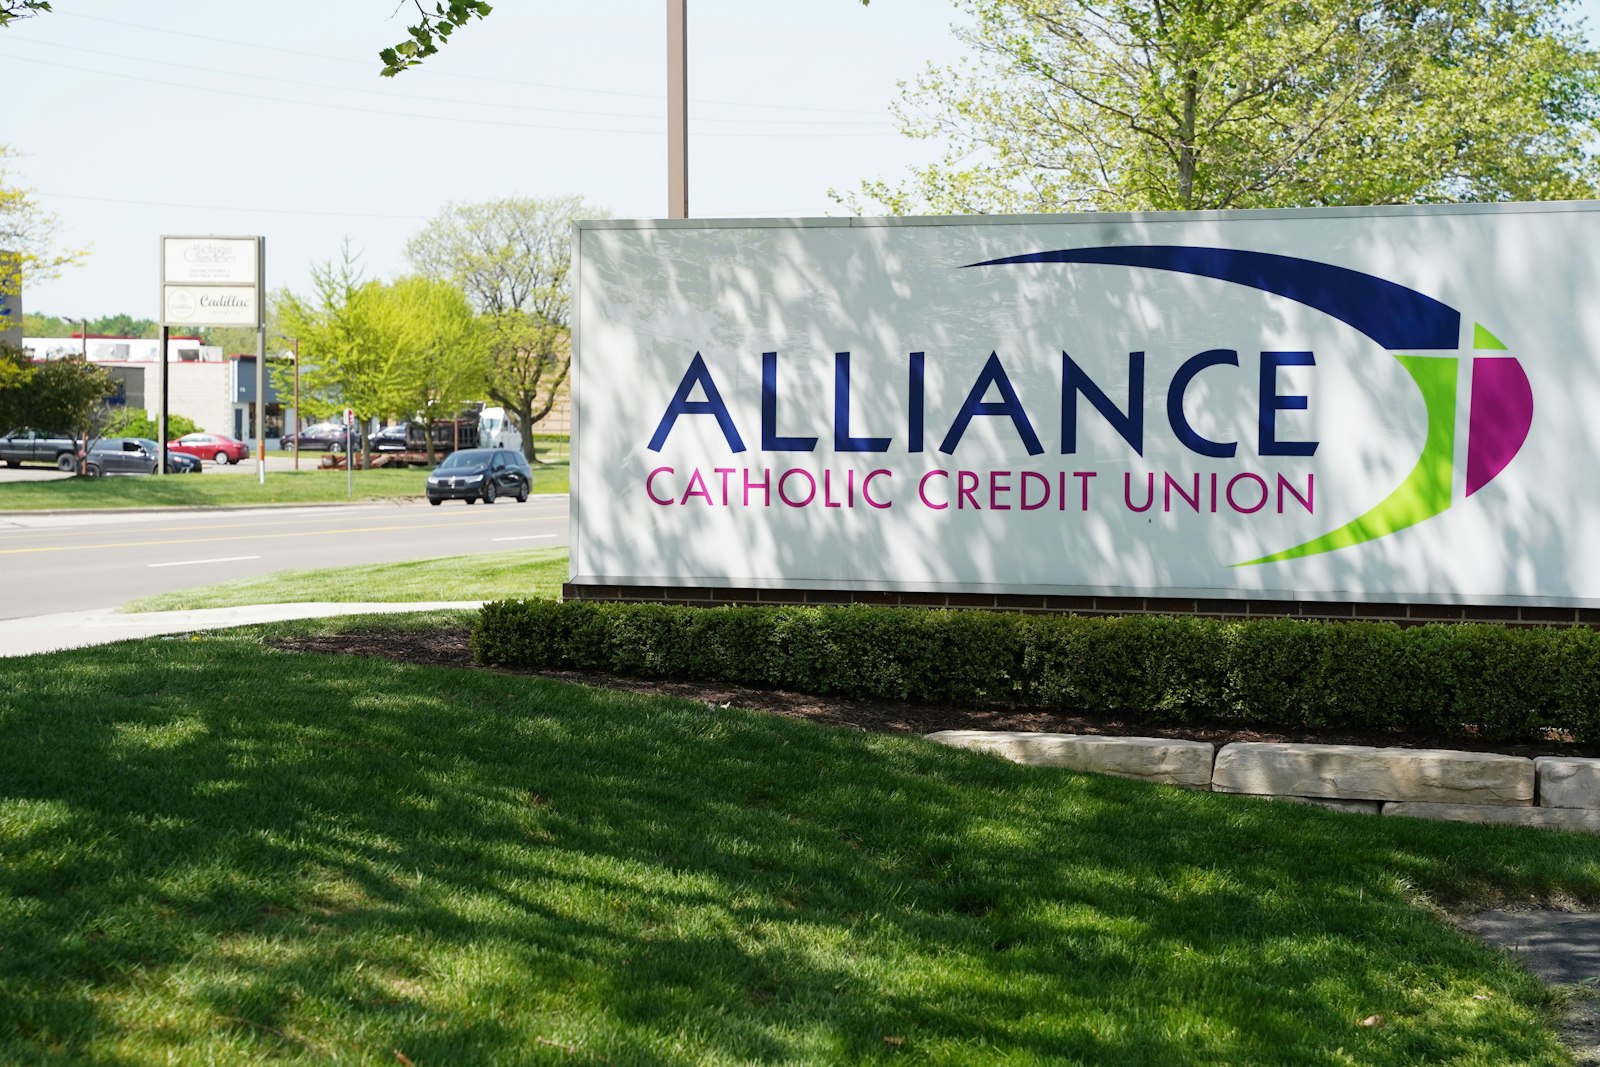 Part of the appeal of credit unions is that they are member-run nonprofits unbeholden to shareholders, which means they can make decisions that directly benefit their members, said Robert Klosko, administrator of the Catholic Credit Unions of America, a national association of Catholic credit unions.